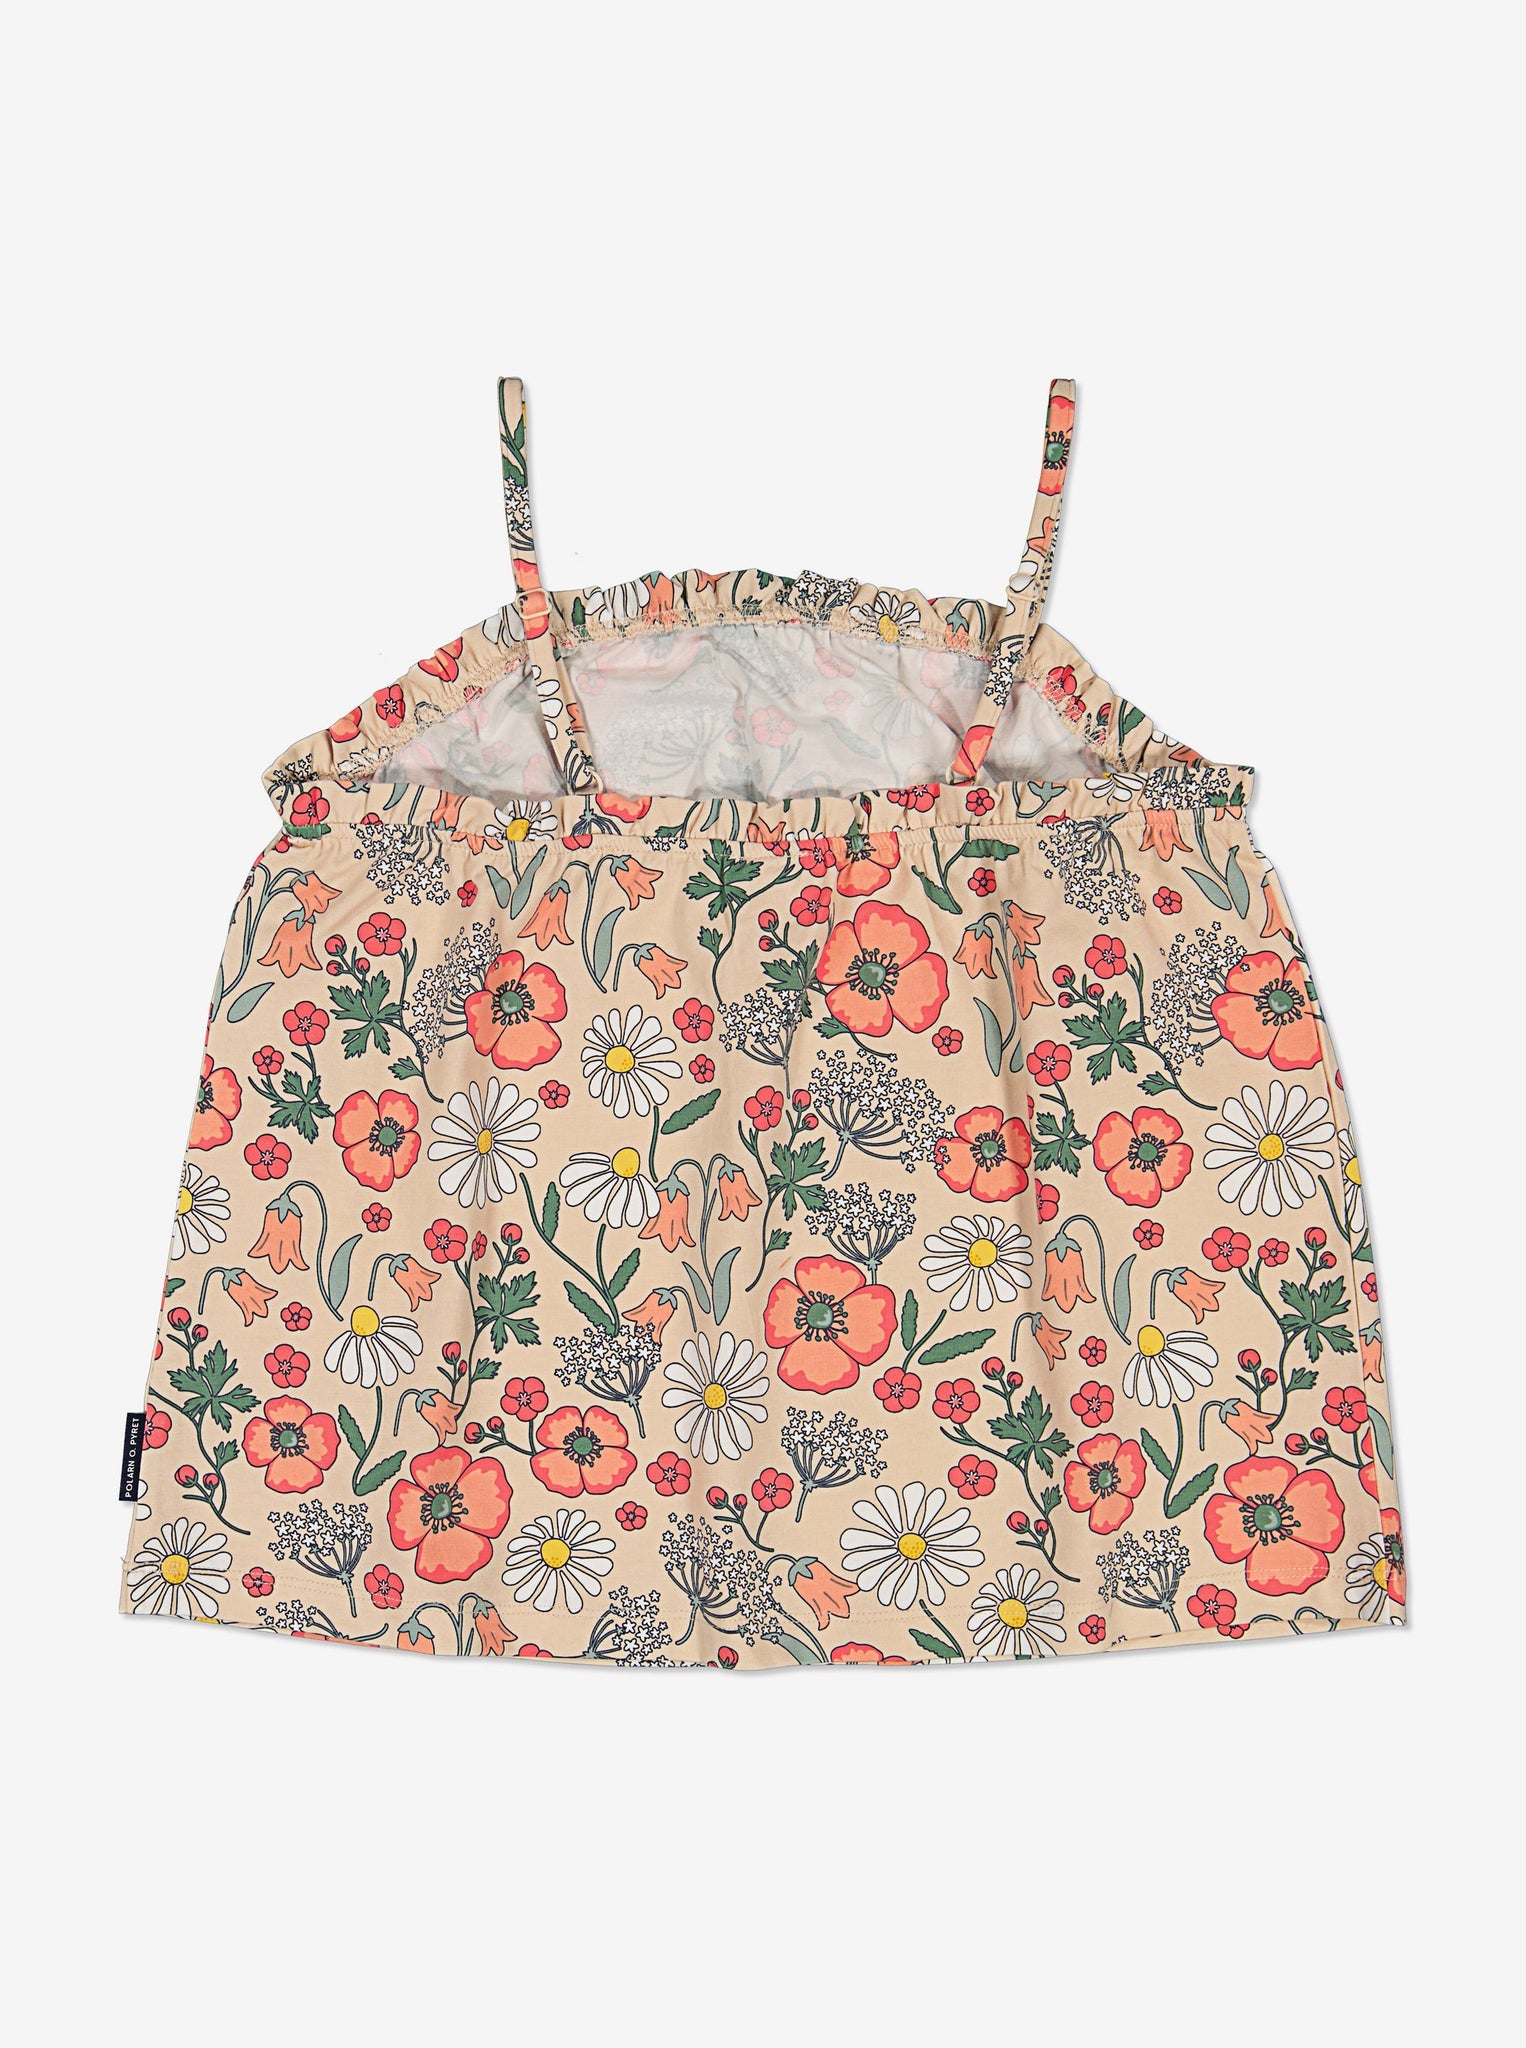 Organic Cotton Floral Girls Top from Polarn O. Pyret Kidswear. Ethically made and sustainably sourced materials.